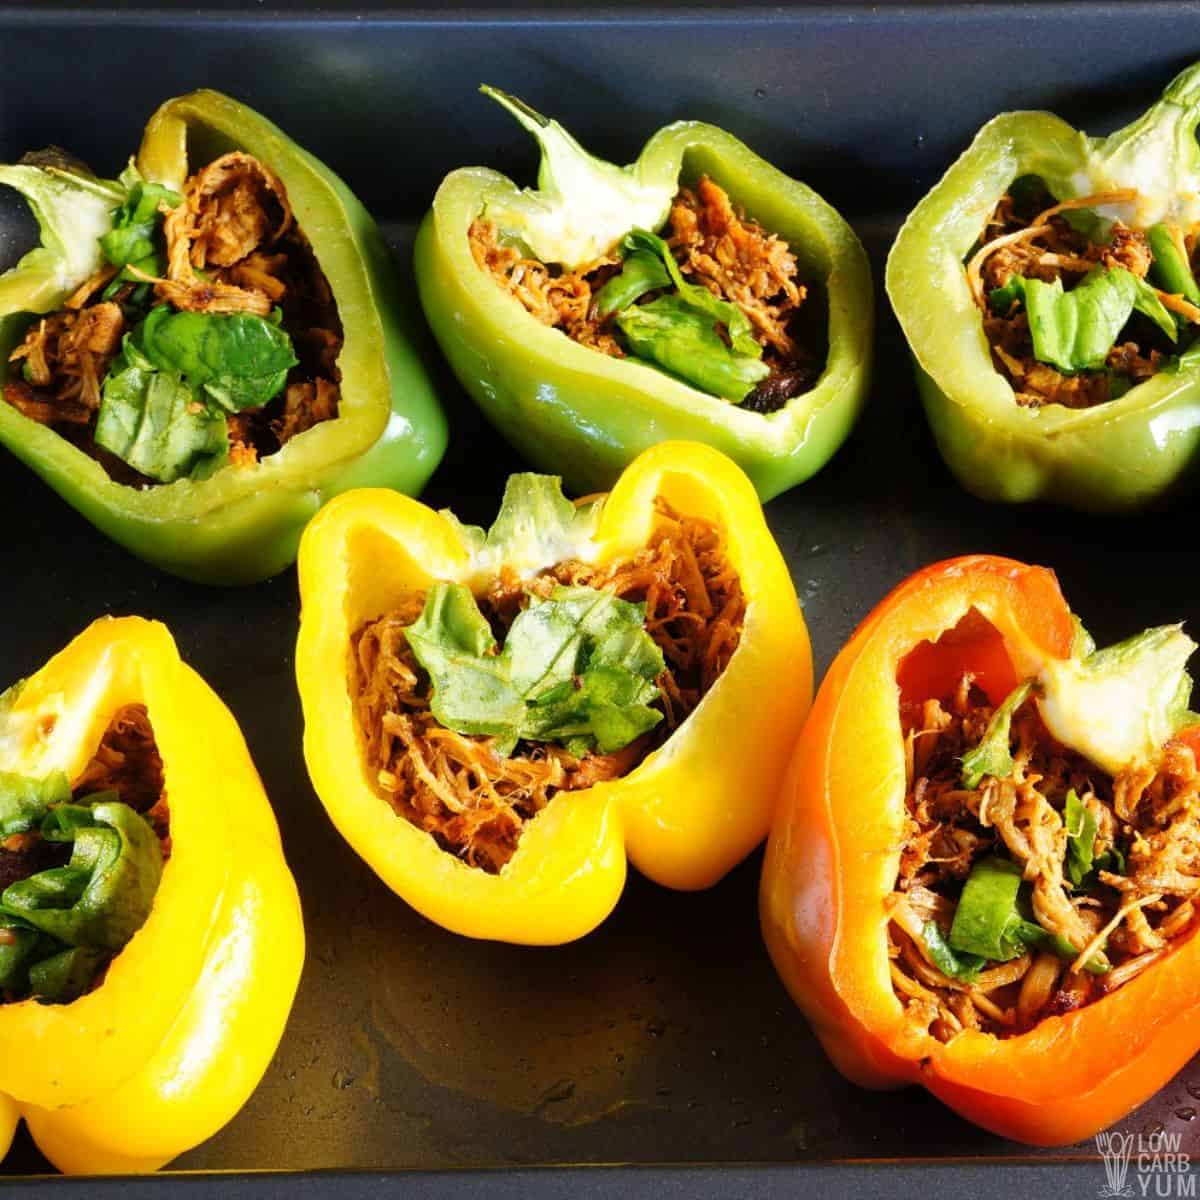 stuffing peppers with pork and spinach.